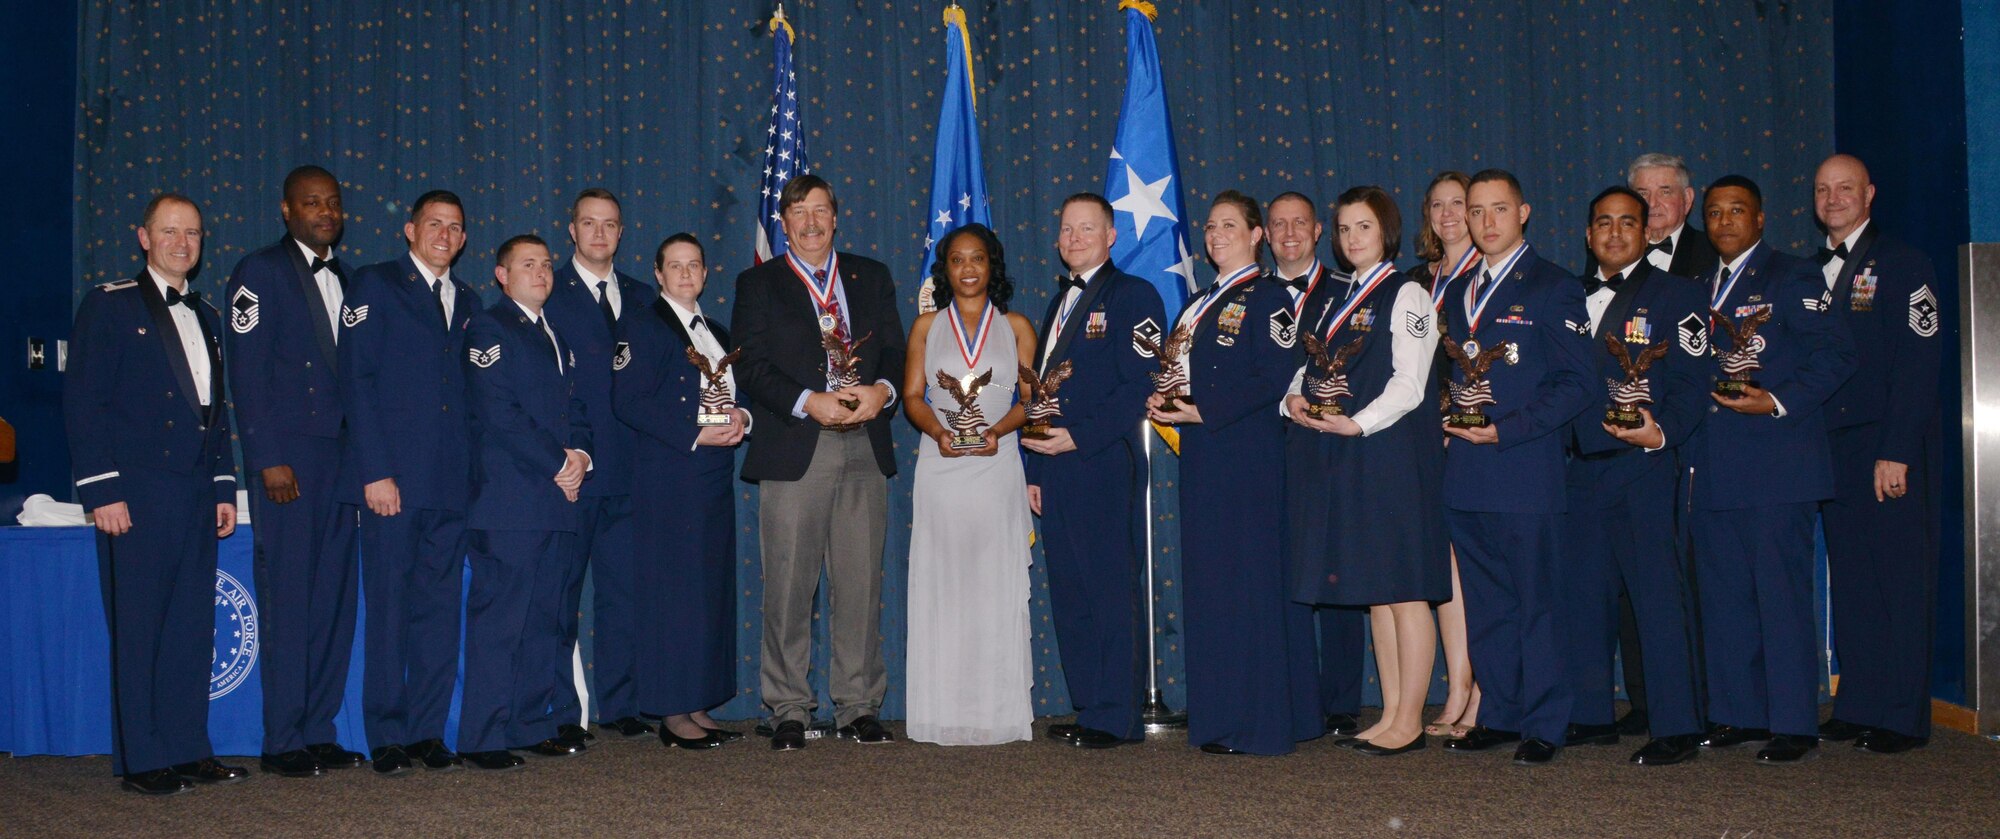 Recipients of the 377th Air Base Wing’s annual awards pose with wing leaders at the ceremony earlier this month at Kirtland Air Force Base.